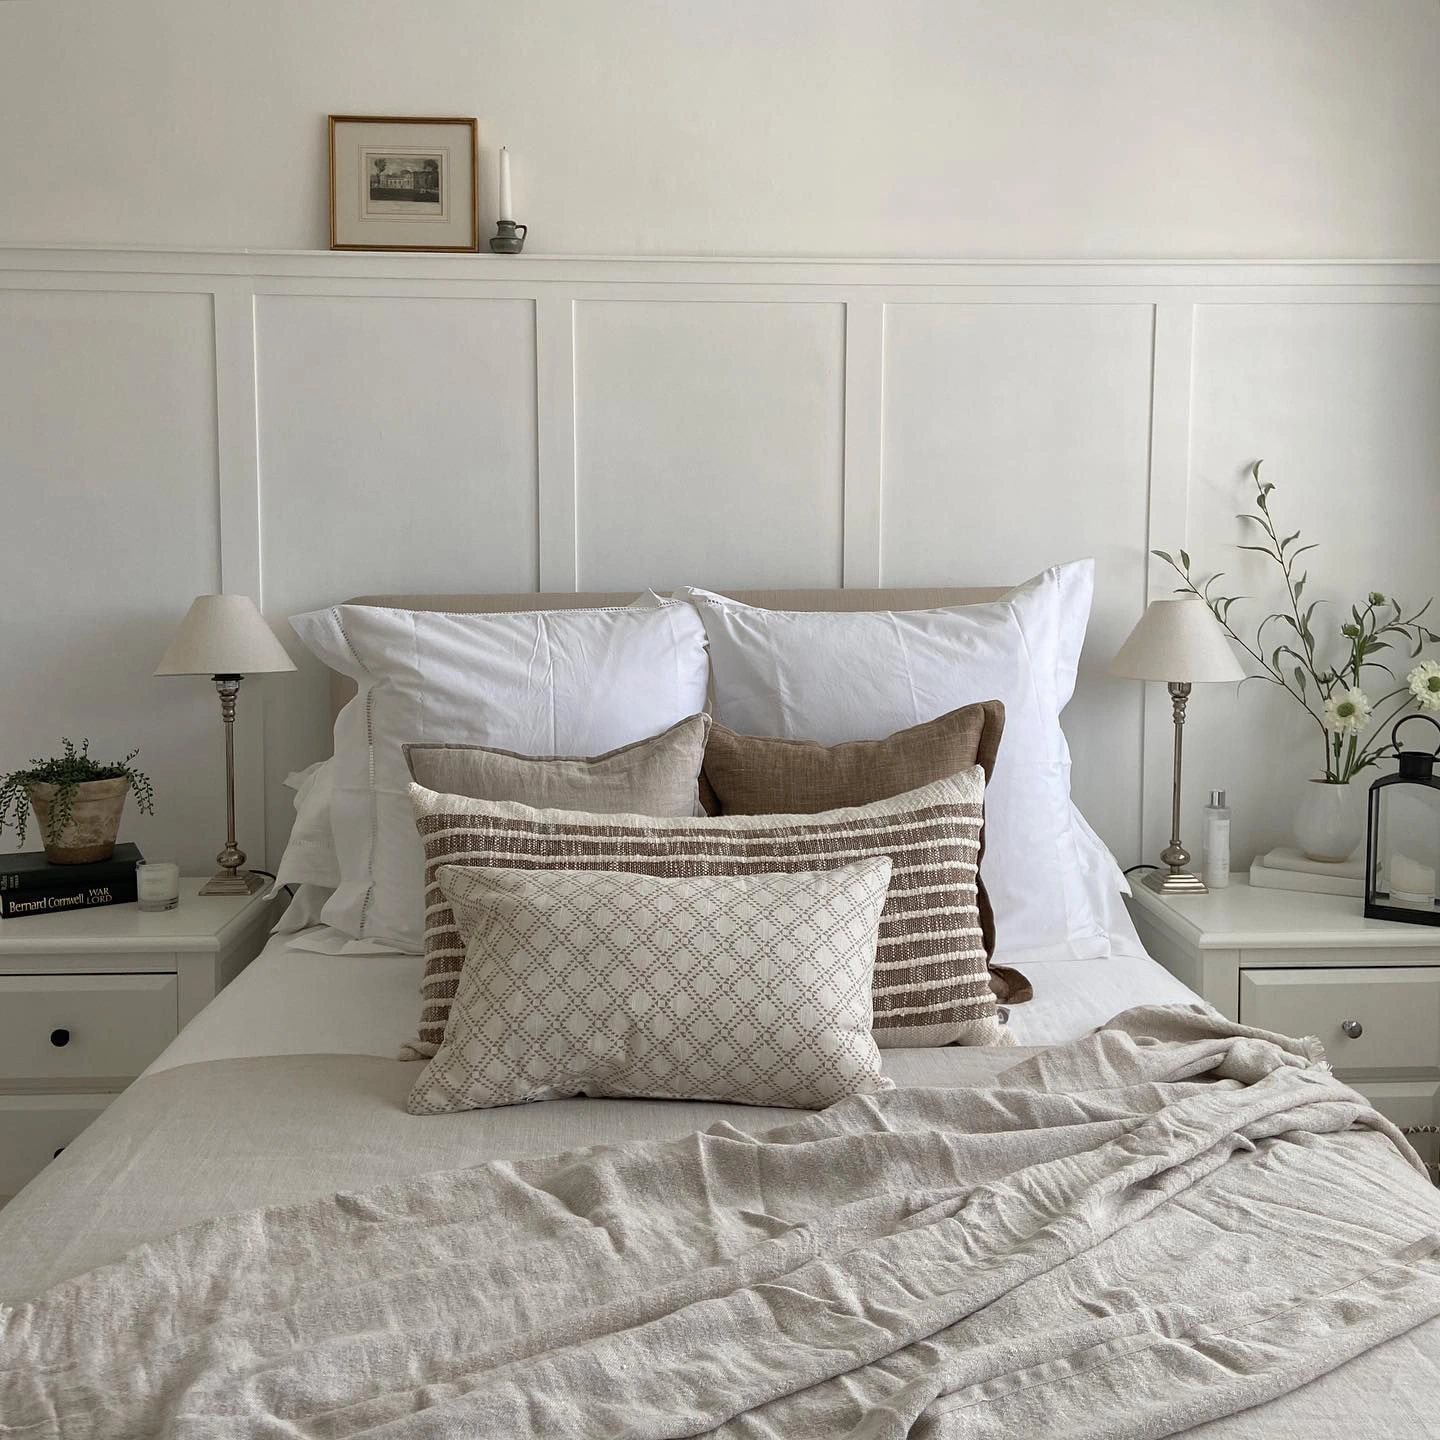 Farrow and Ball All White 2005 bedroom